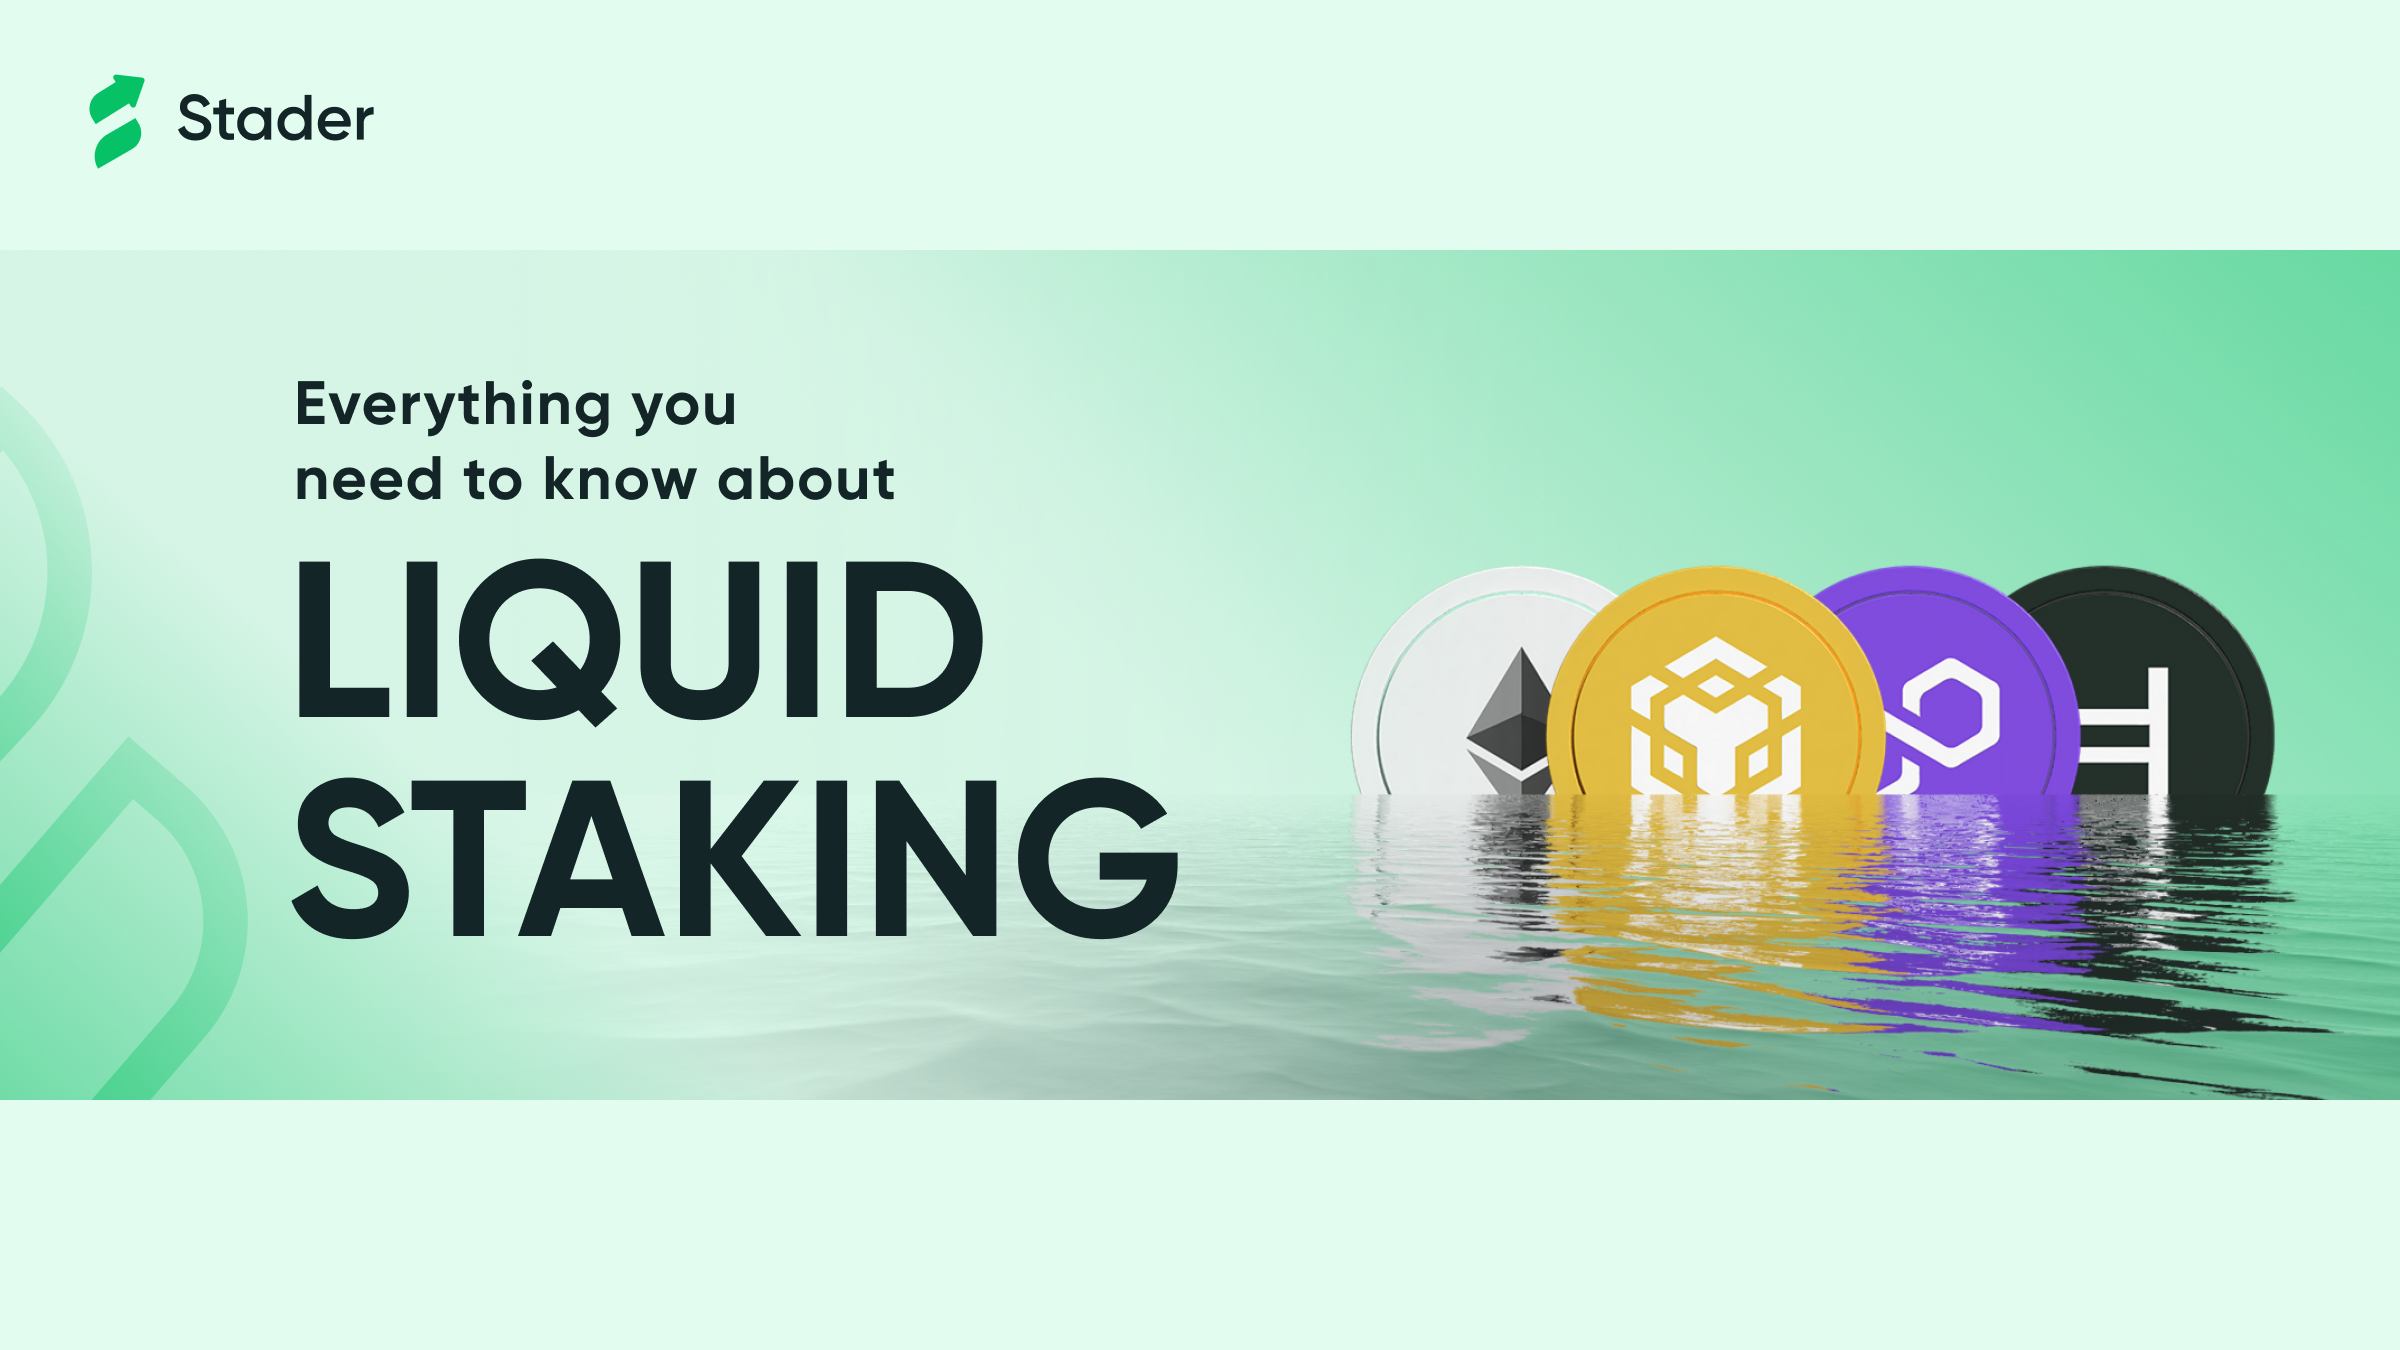 iquid staking – a game-changing concept that allows investors to earn staking rewards without compromising liquidity. 